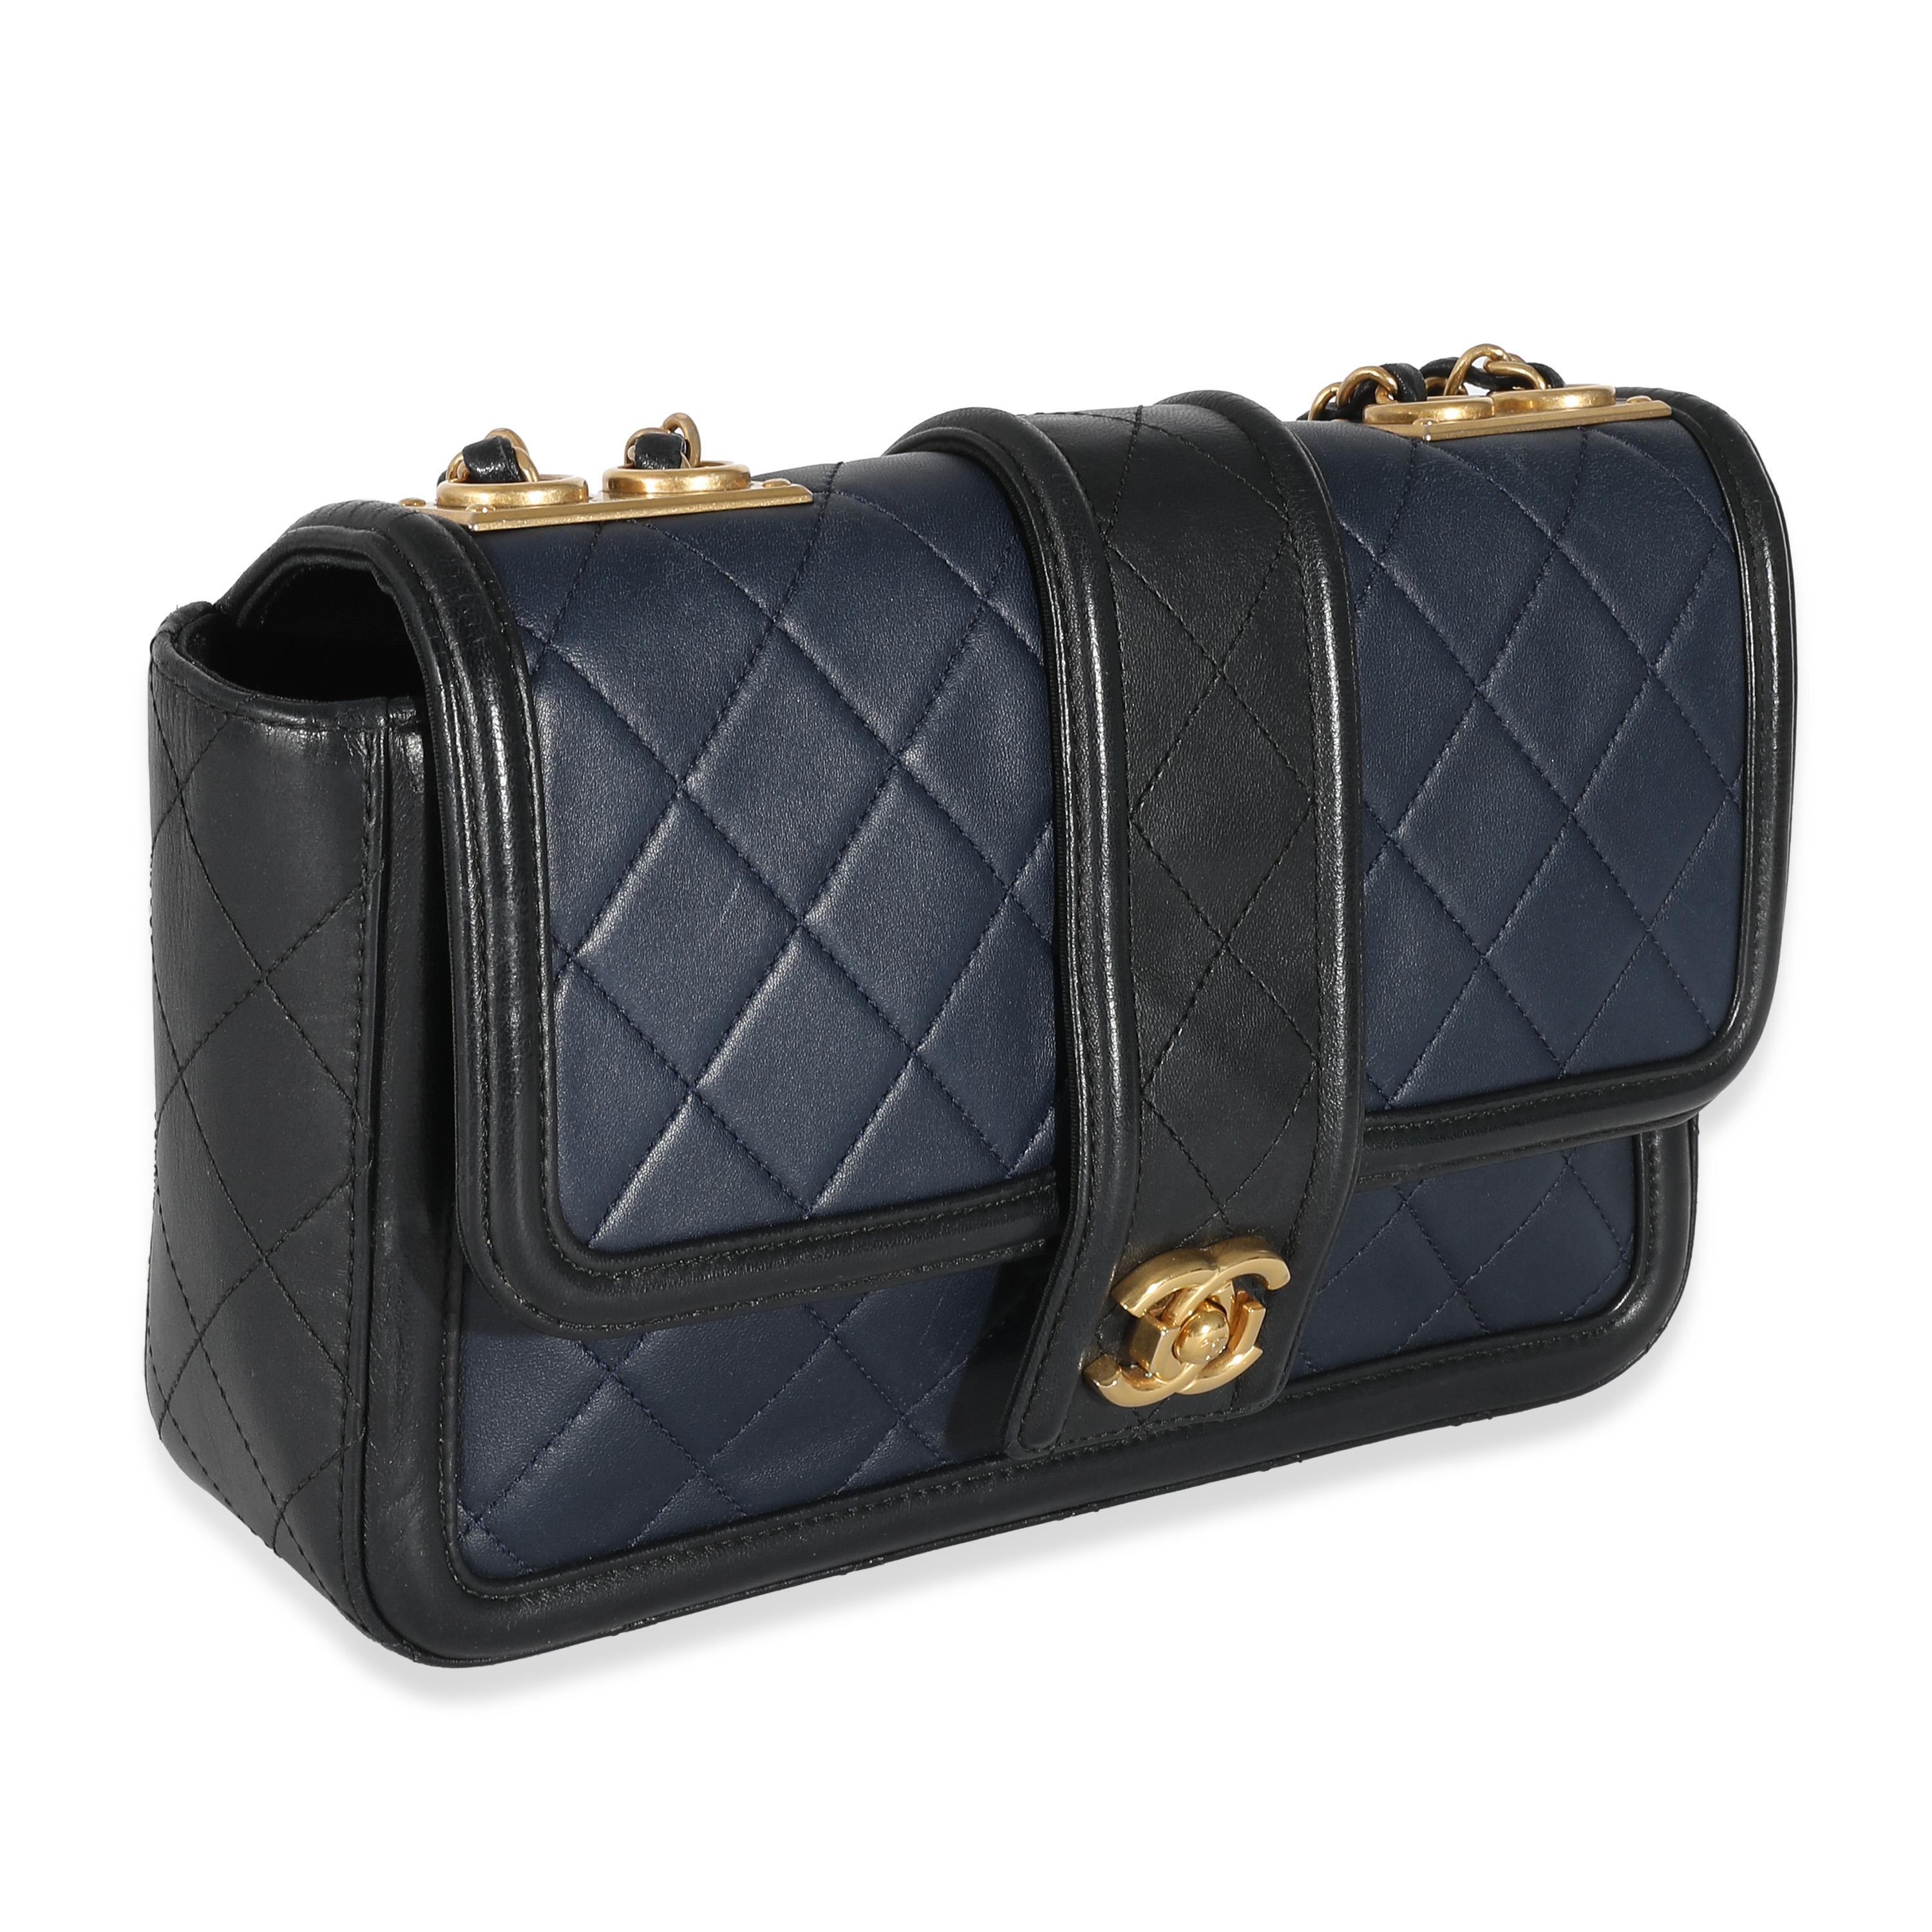 Listing Title: Chanel Navy Black Quilted Lambskin Medium Elegant CC Flap Bag
SKU: 134683
Condition: Pre-owned 
Condition Description: A timeless classic that never goes out of style, the flap bag from Chanel dates back to 1955 and has seen a number